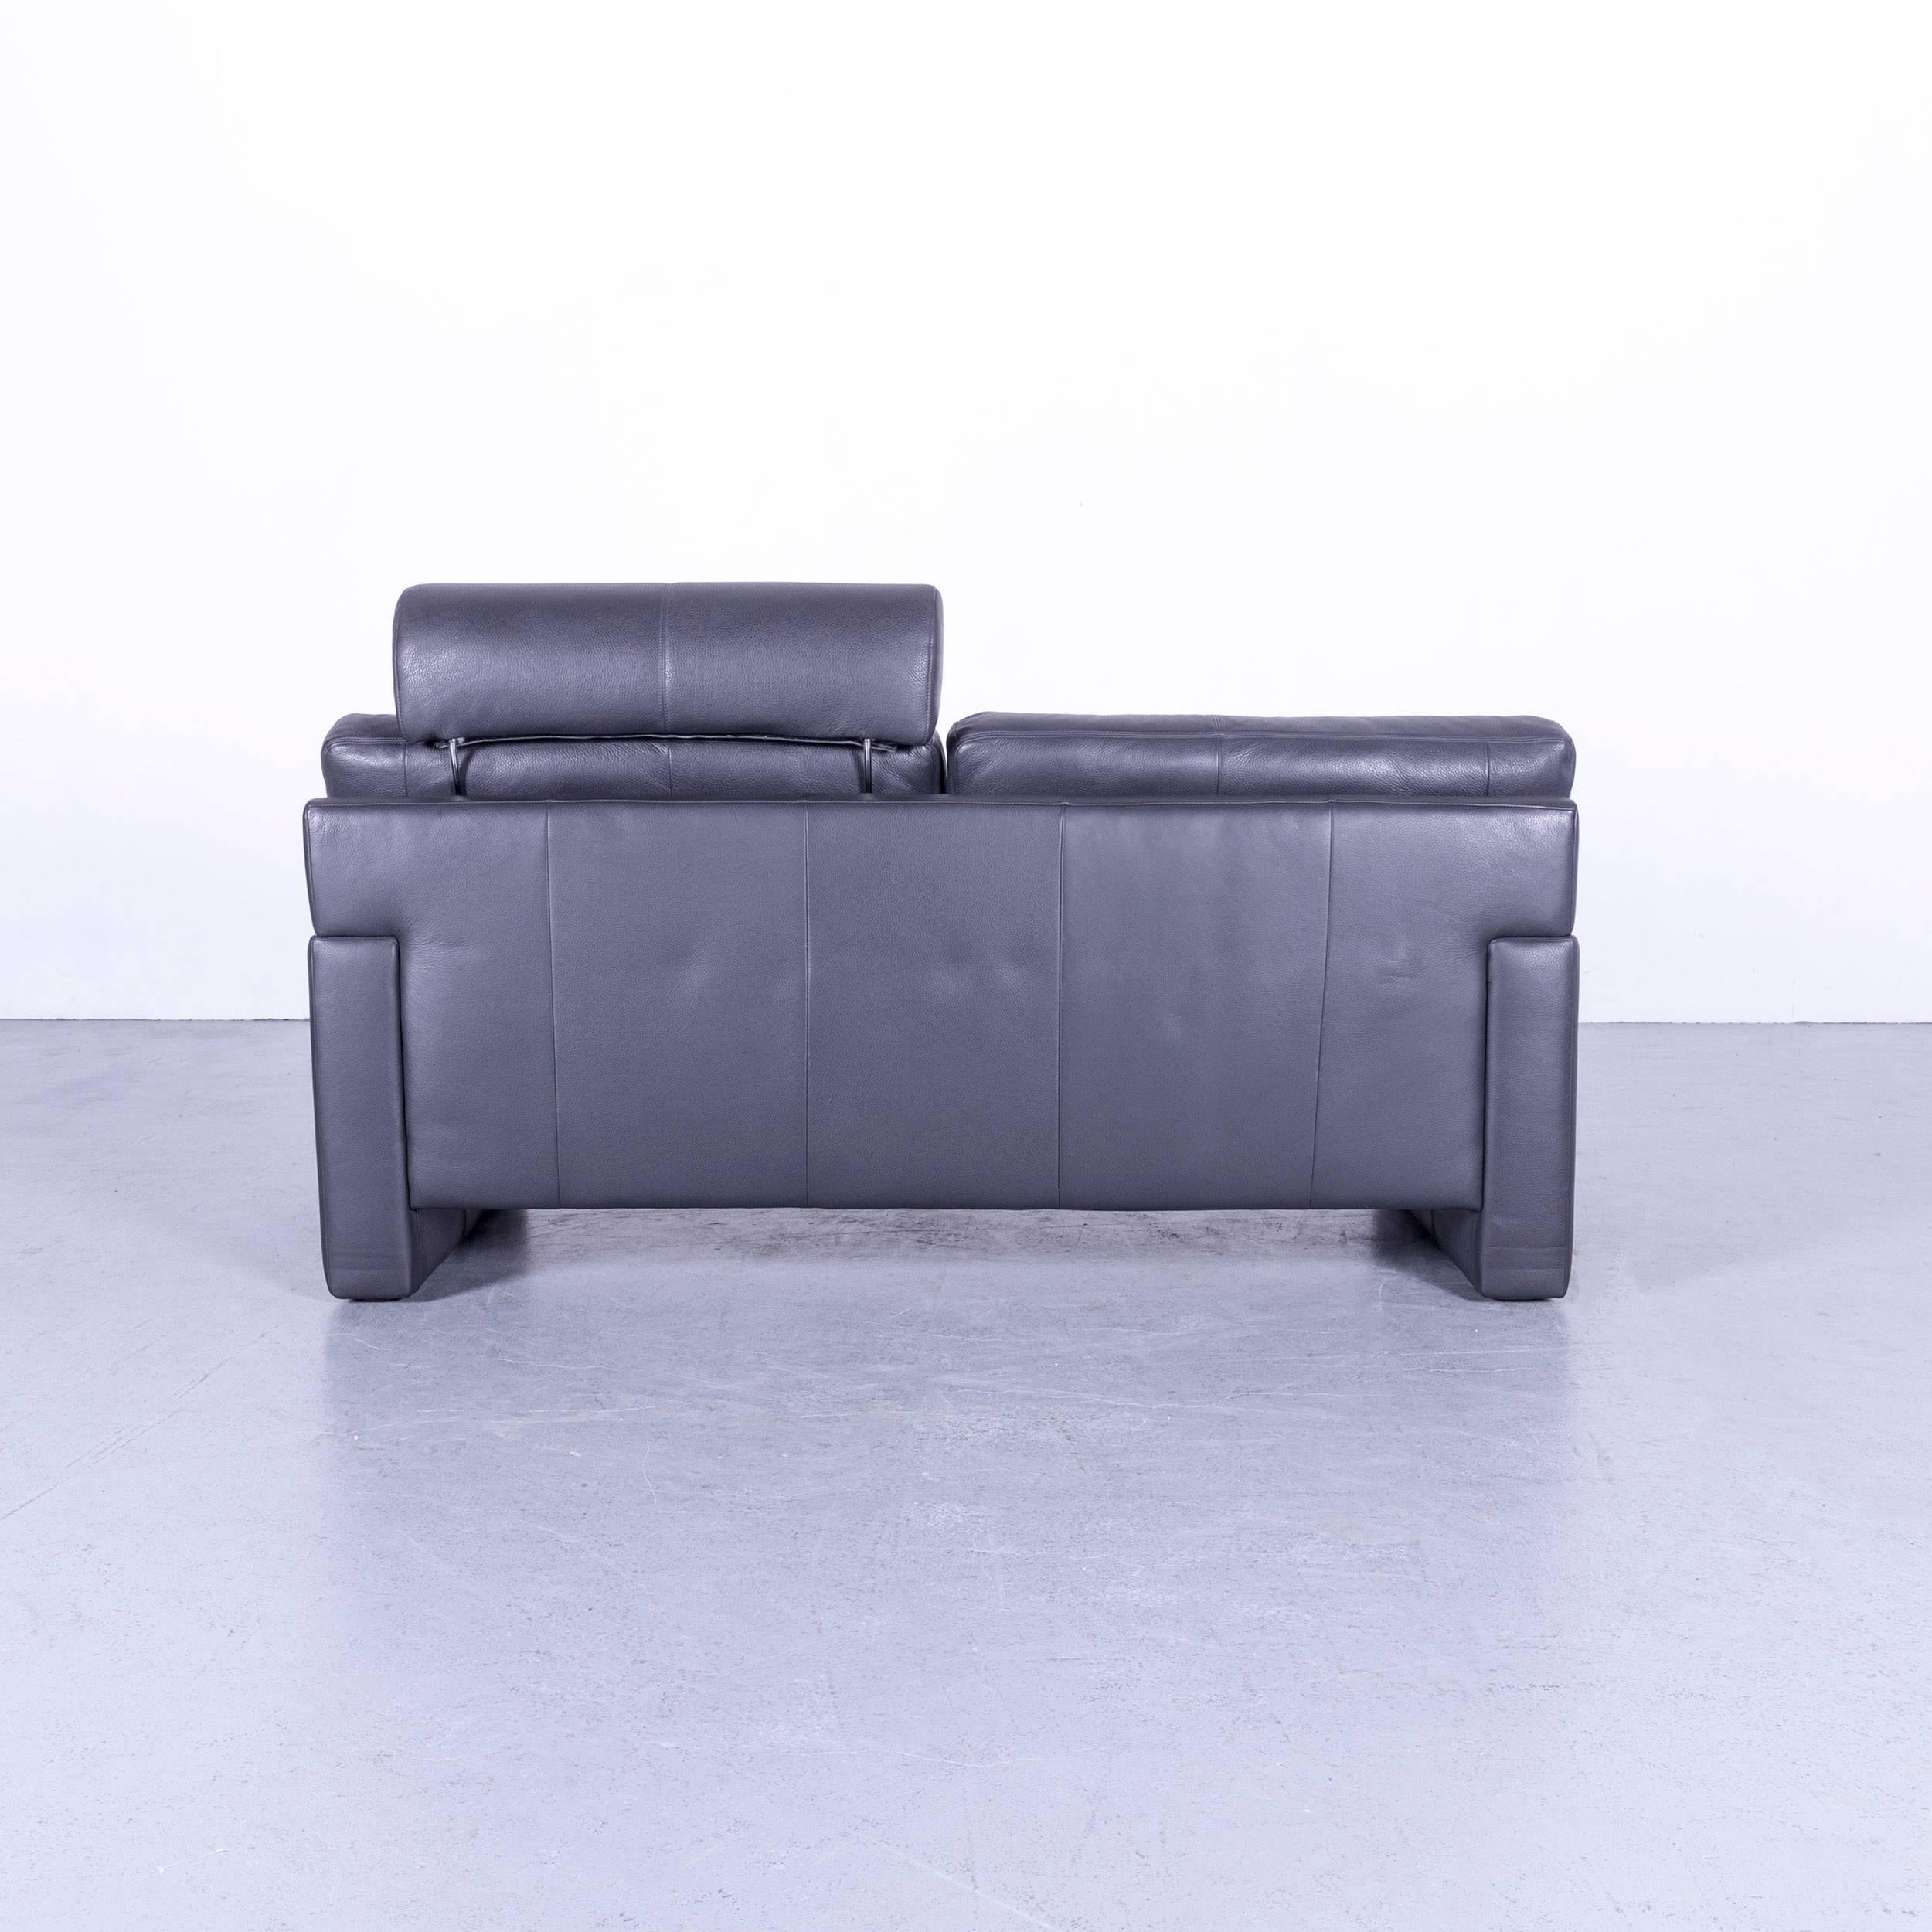 Erpo CL 300 Sofa Set of Two Leather Grey Three/Two-Seat Couch 7